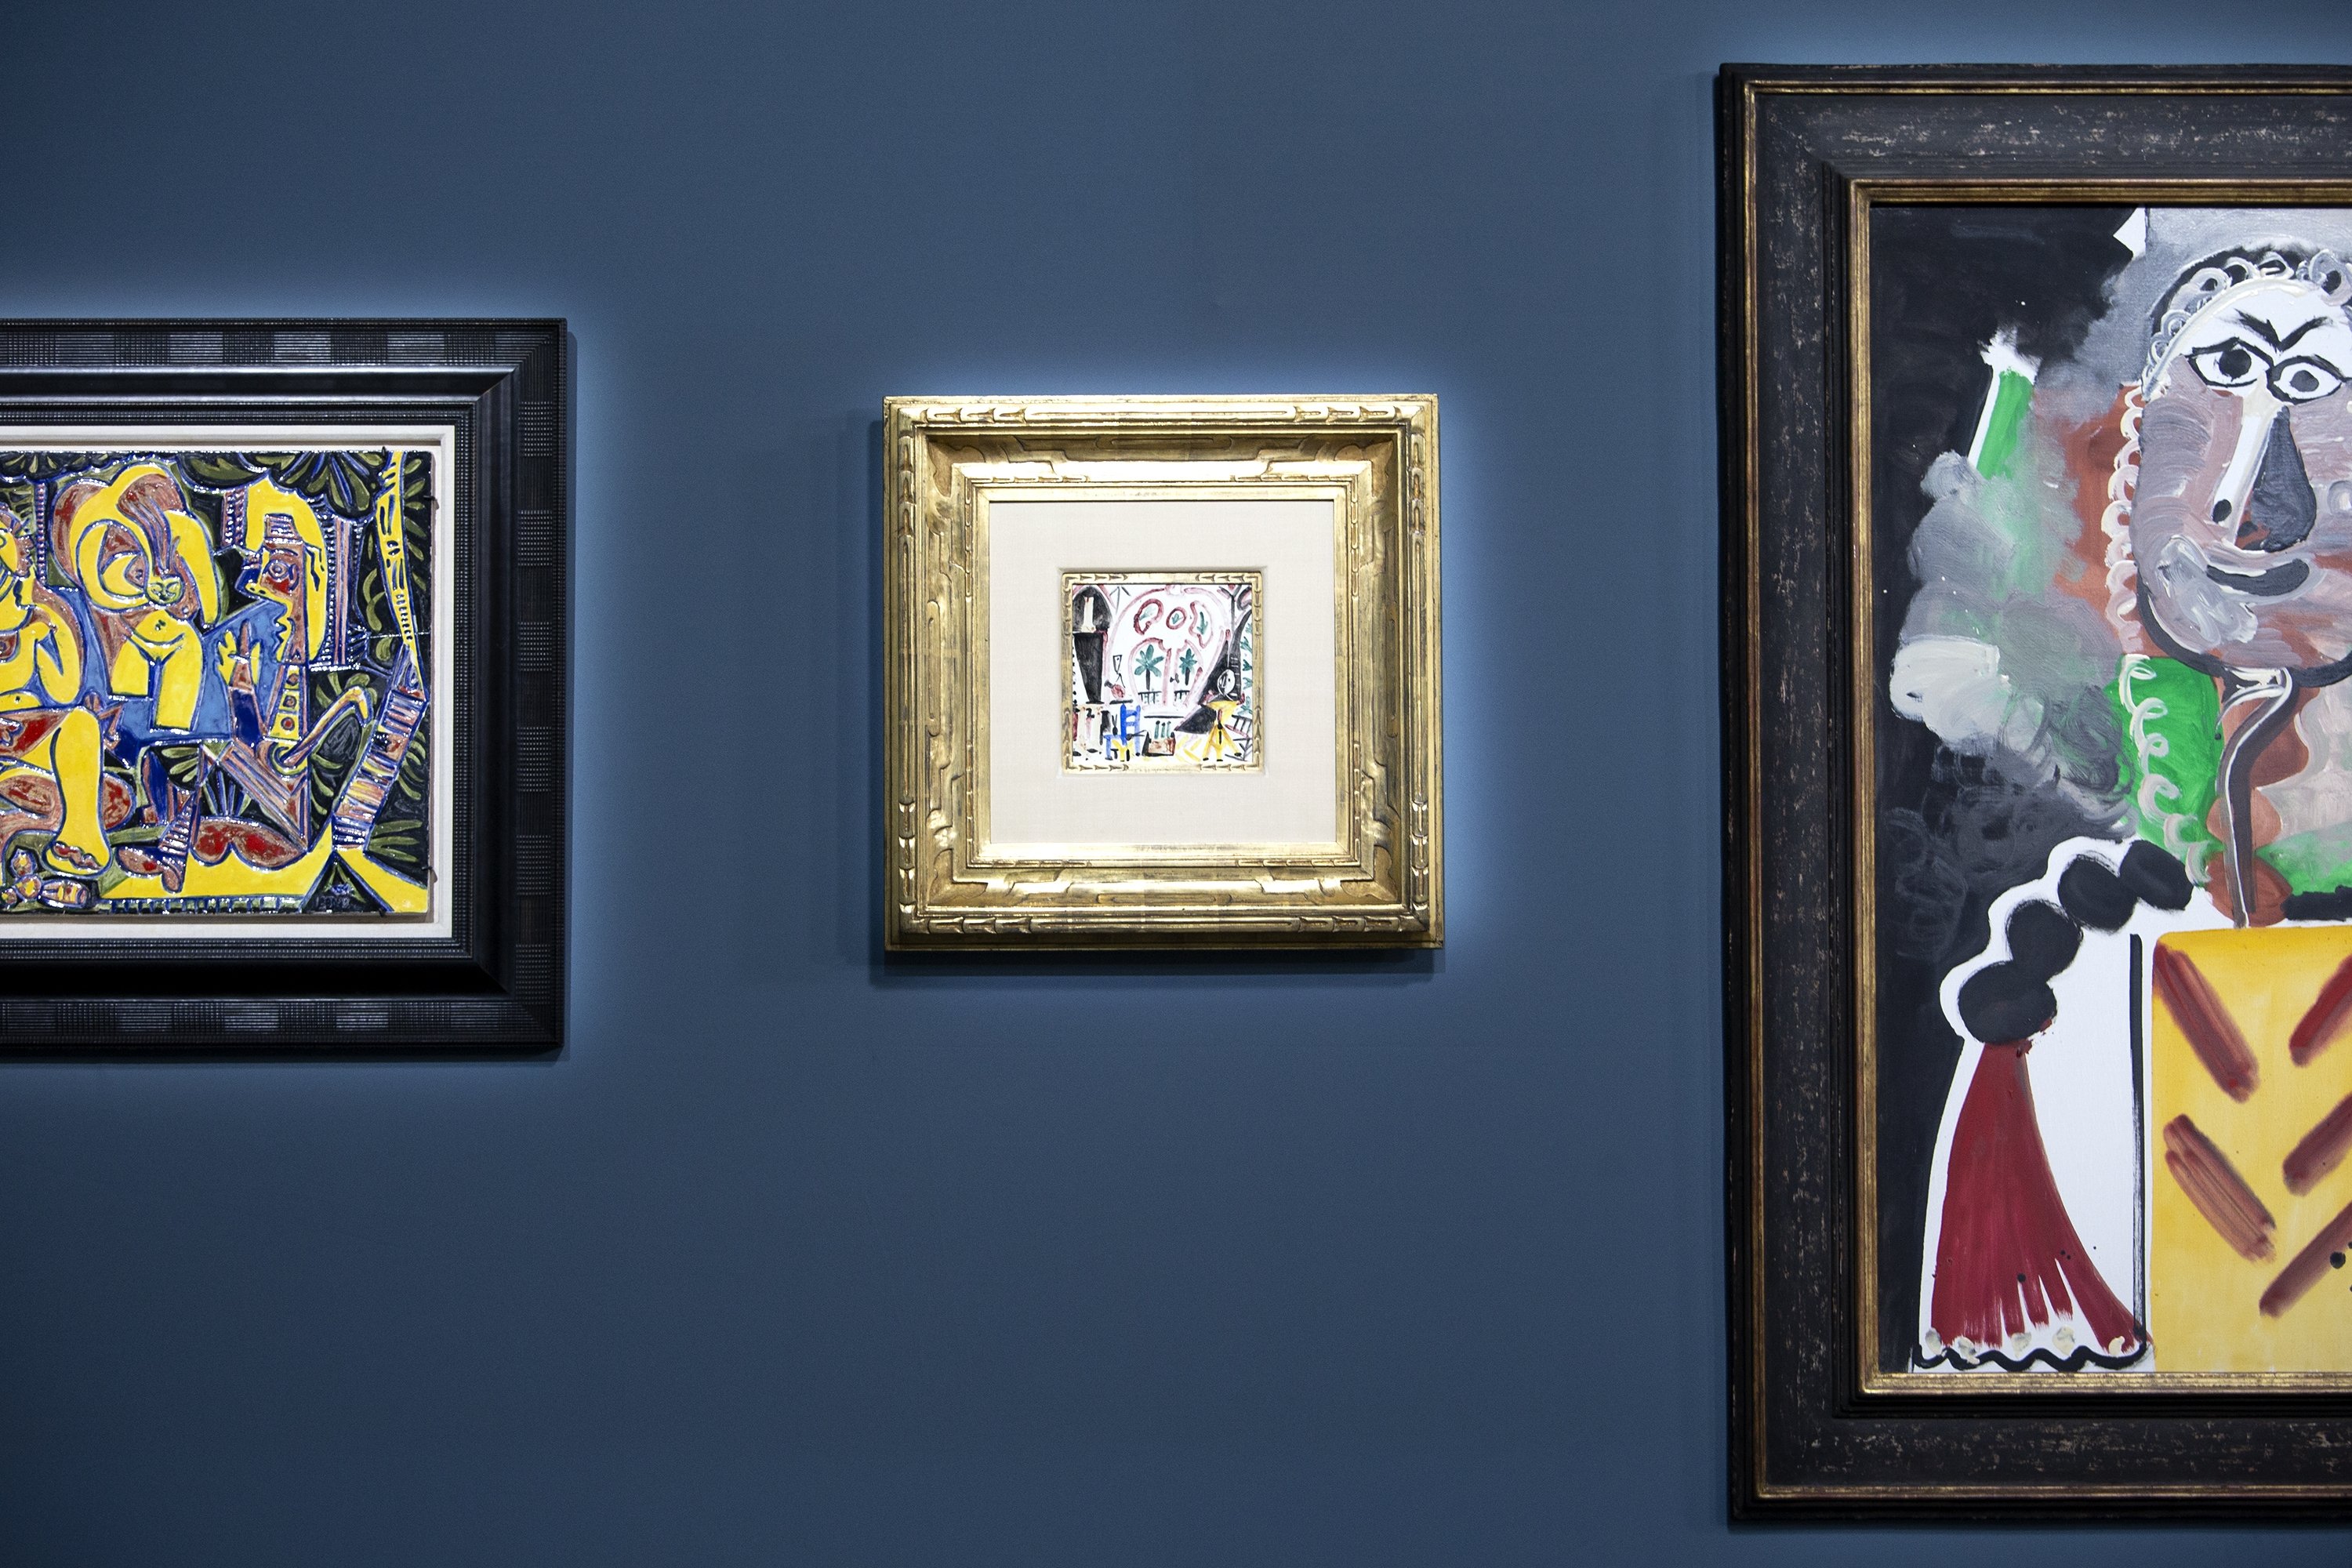 Works by Pablo Picasso are displayed for auction at the Bellagio hotel and casino in Las Vegas, U.S., Oct. 23, 2021. (AP Photo)